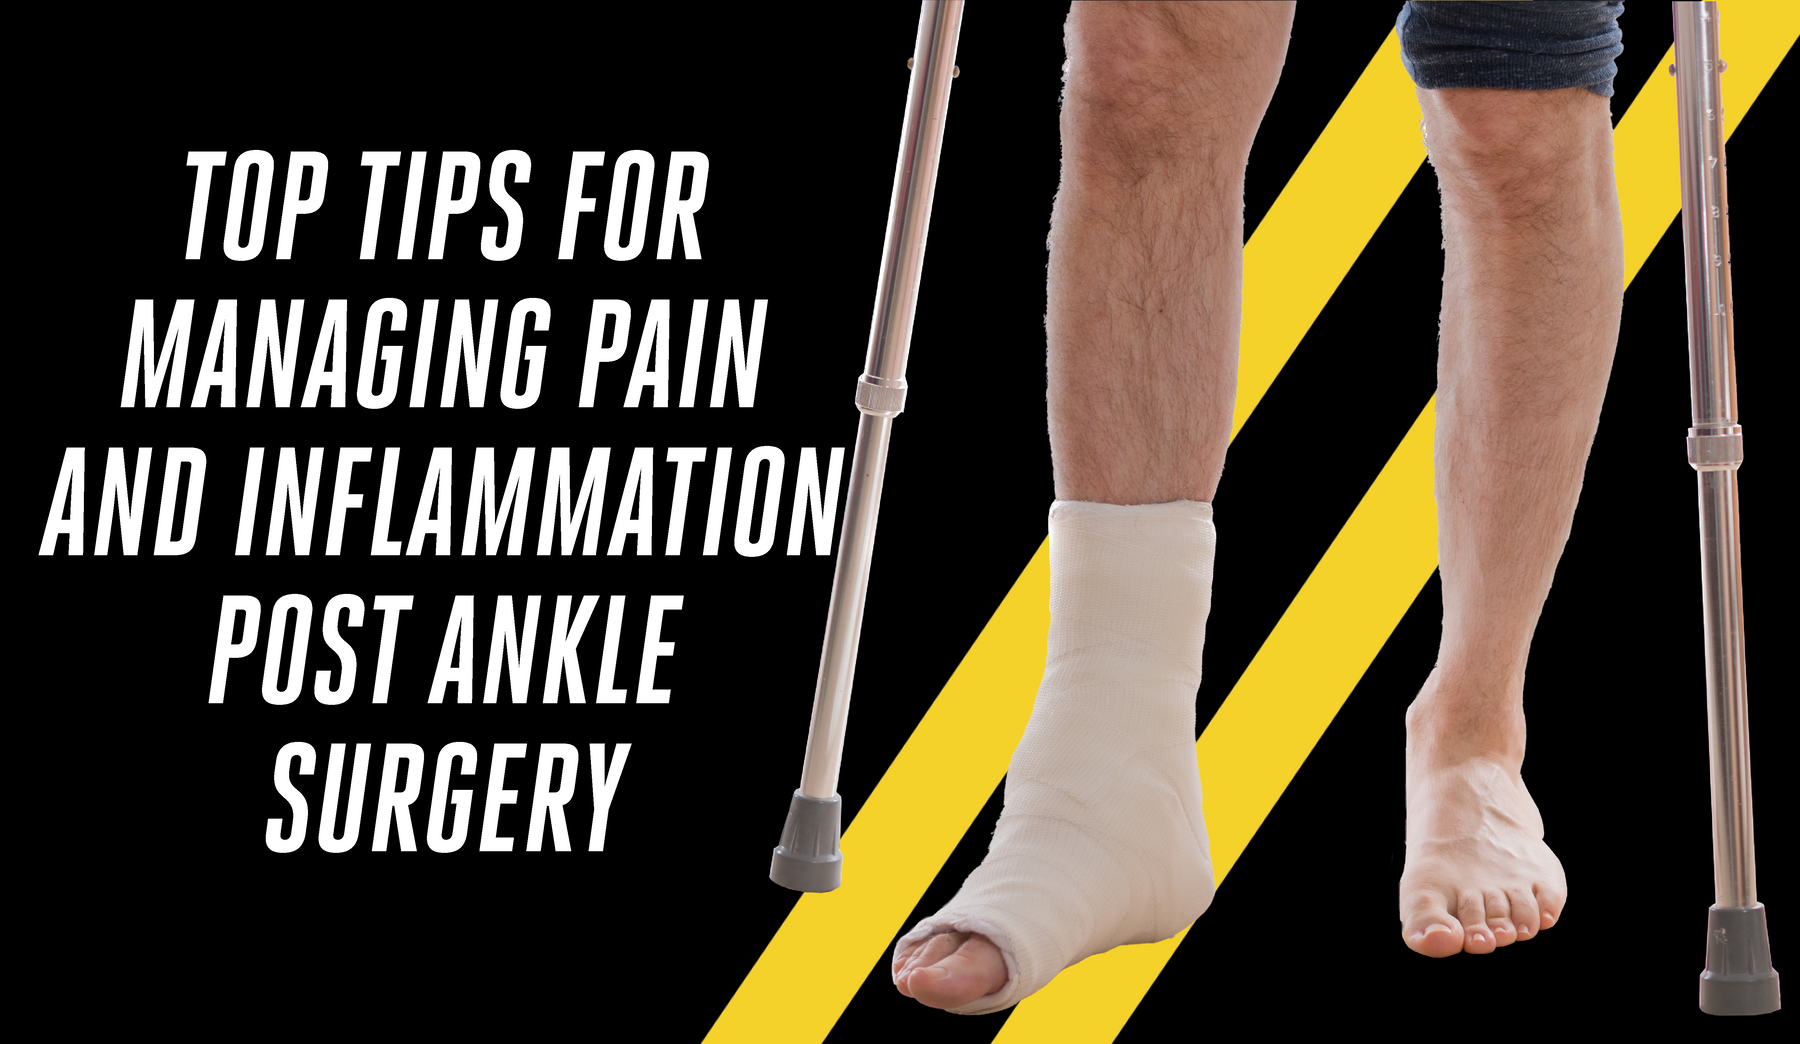 Top Tips for managing pain and inflammation post Ankle Surgery